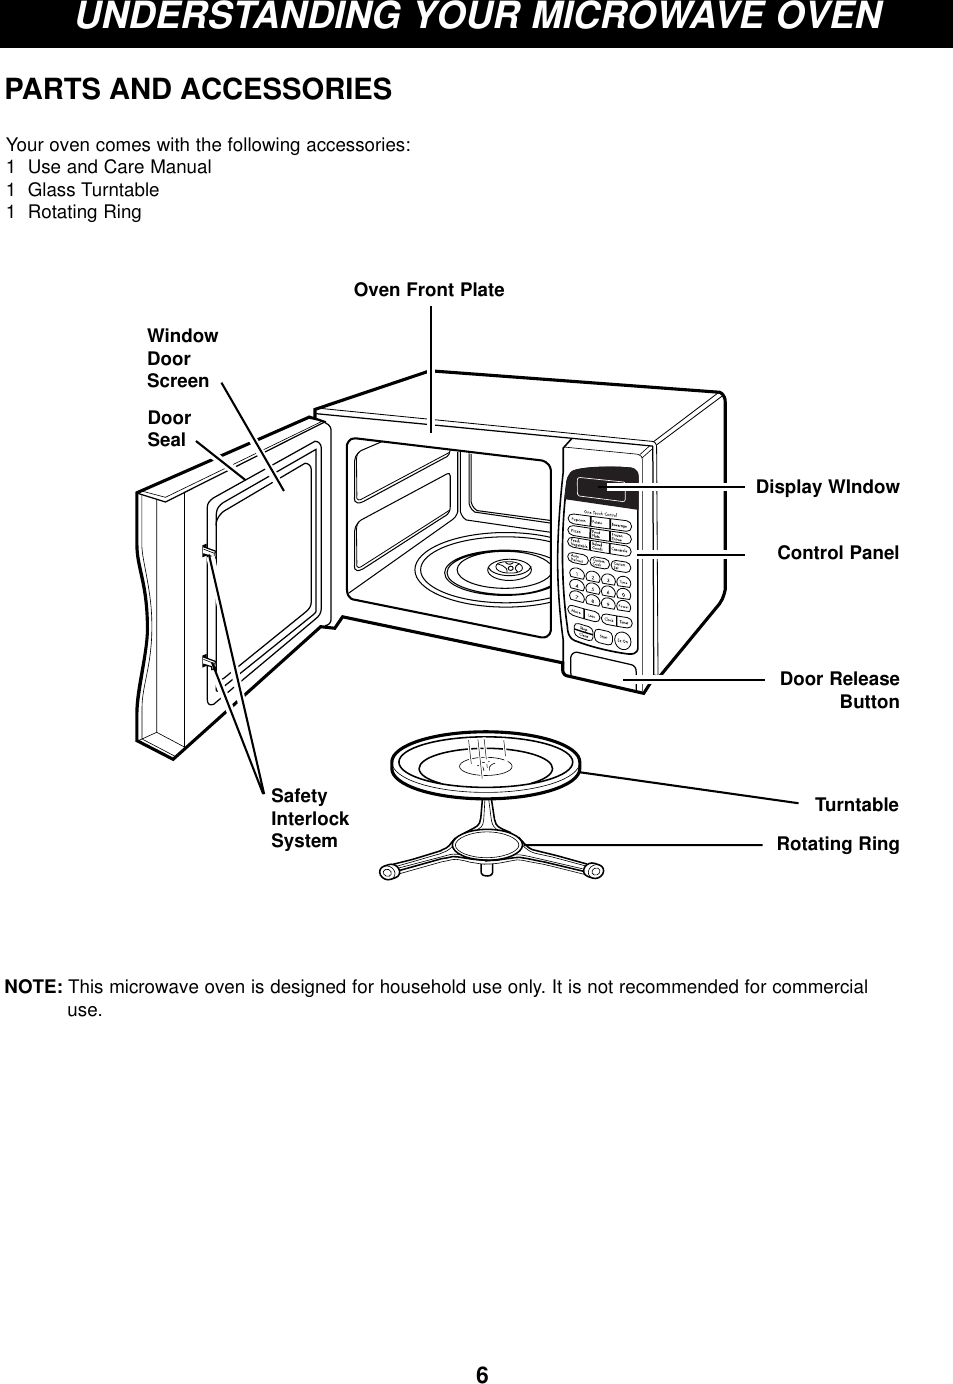 6UNDERSTANDING YOUR MICROWAVE OVENPARTS AND ACCESSORIESWindowDoorScreenDoorSealSafetyInterlockSystemYour oven comes with the following accessories:1  Use and Care Manual1  Glass Turntable1  Rotating RingDoor ReleaseButtonControl PanelOven Front PlateDisplay WIndowTurntableRotating RingNOTE: This microwave oven is designed for household use only. It is not recommended for commercial use.